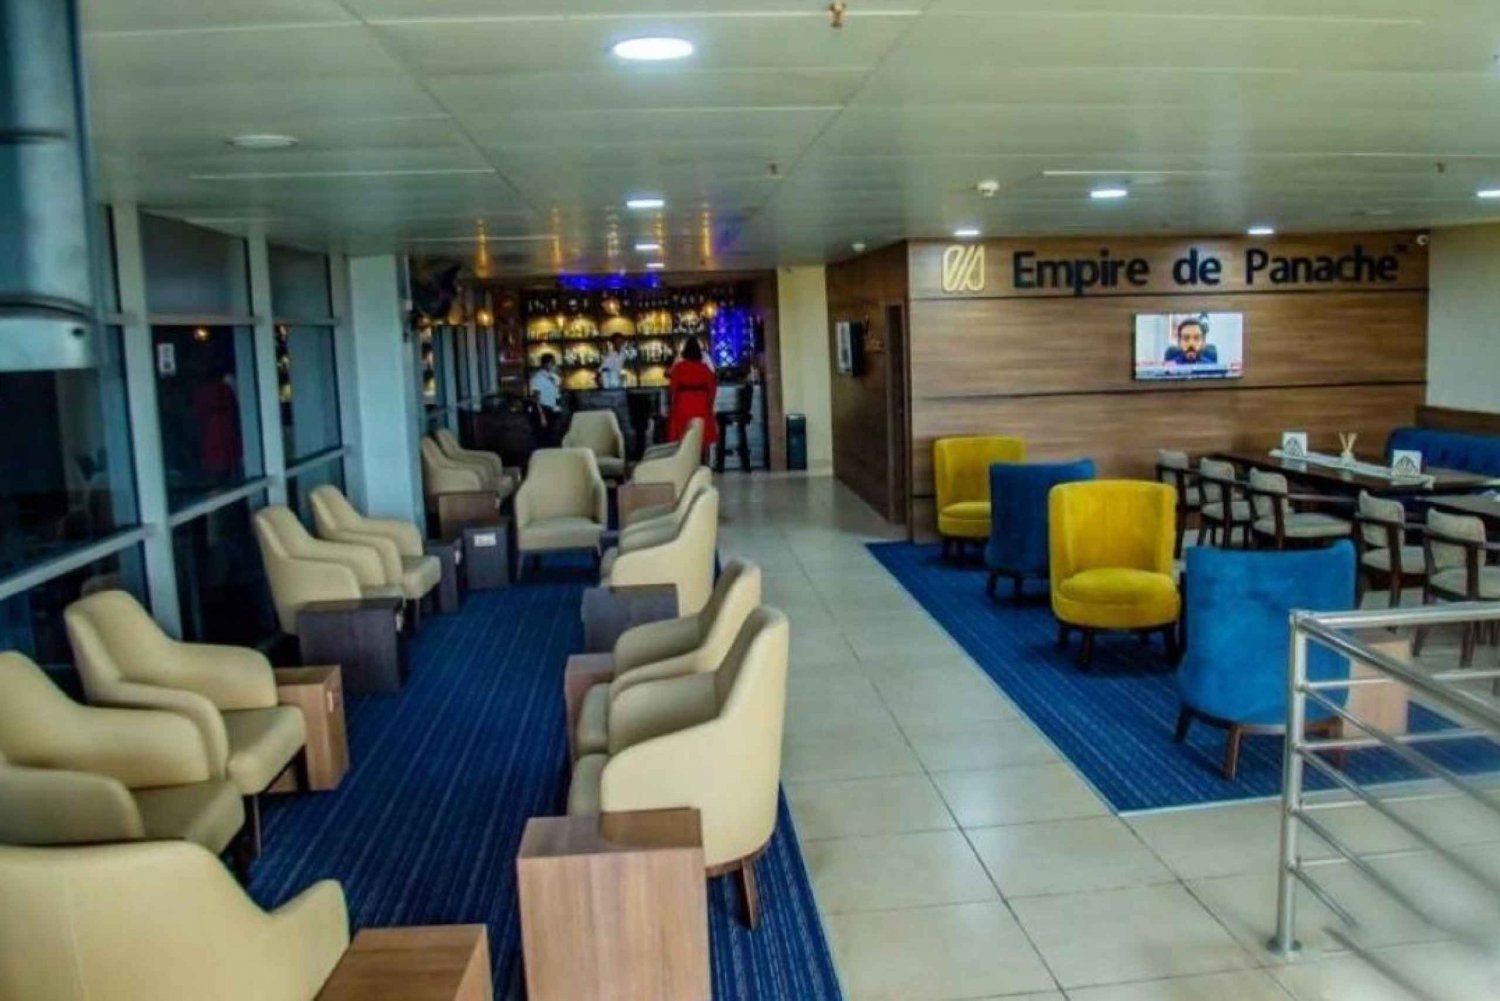 Port Harcourt: Access to airport Lounge